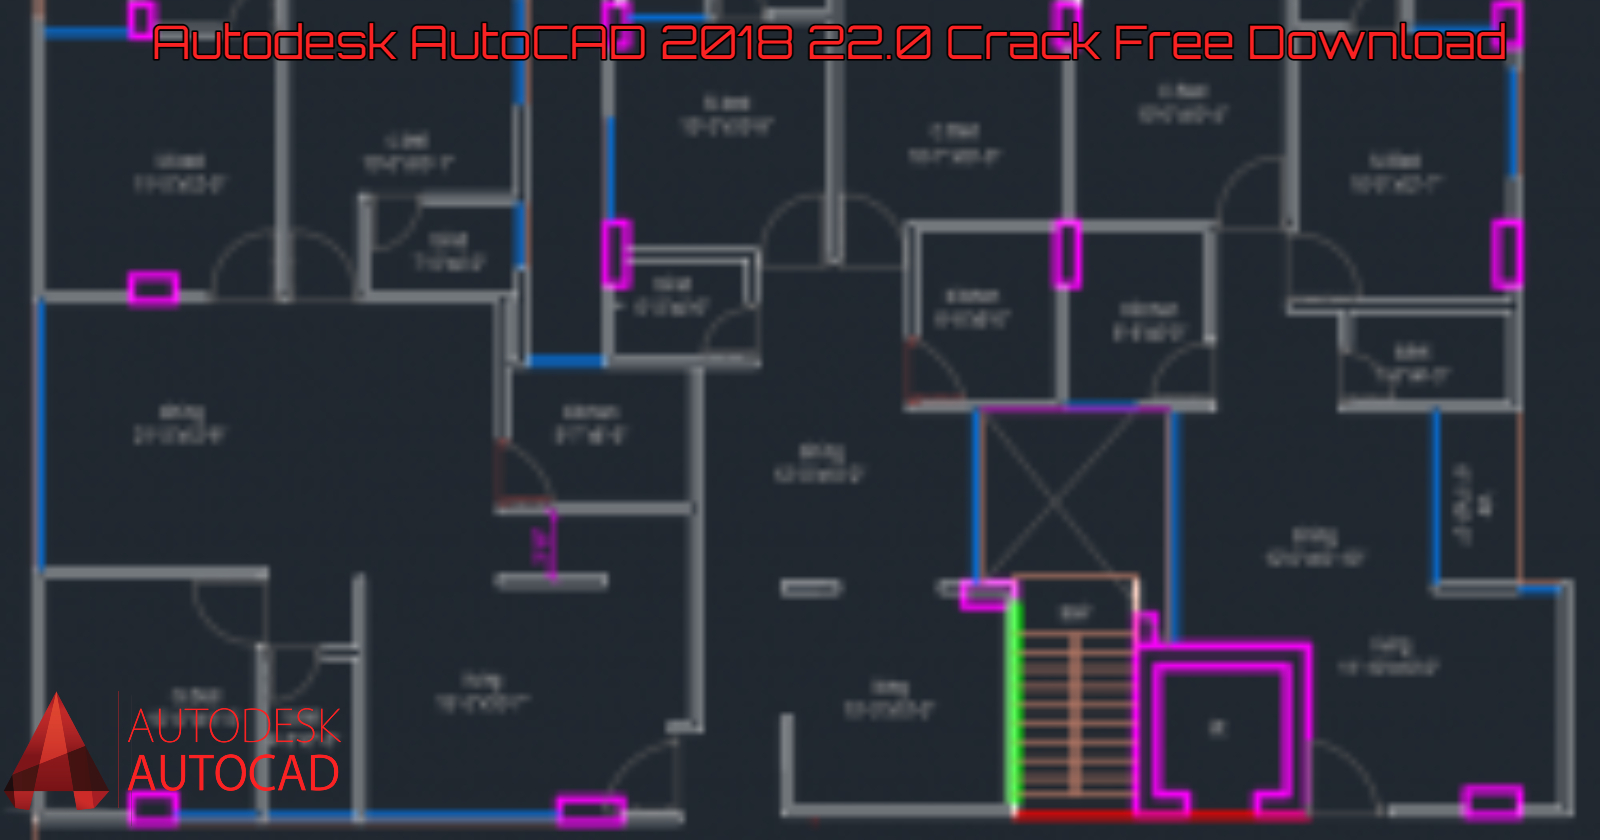 You are currently viewing Autodesk AutoCAD 2018 22.0 Crack Free Download